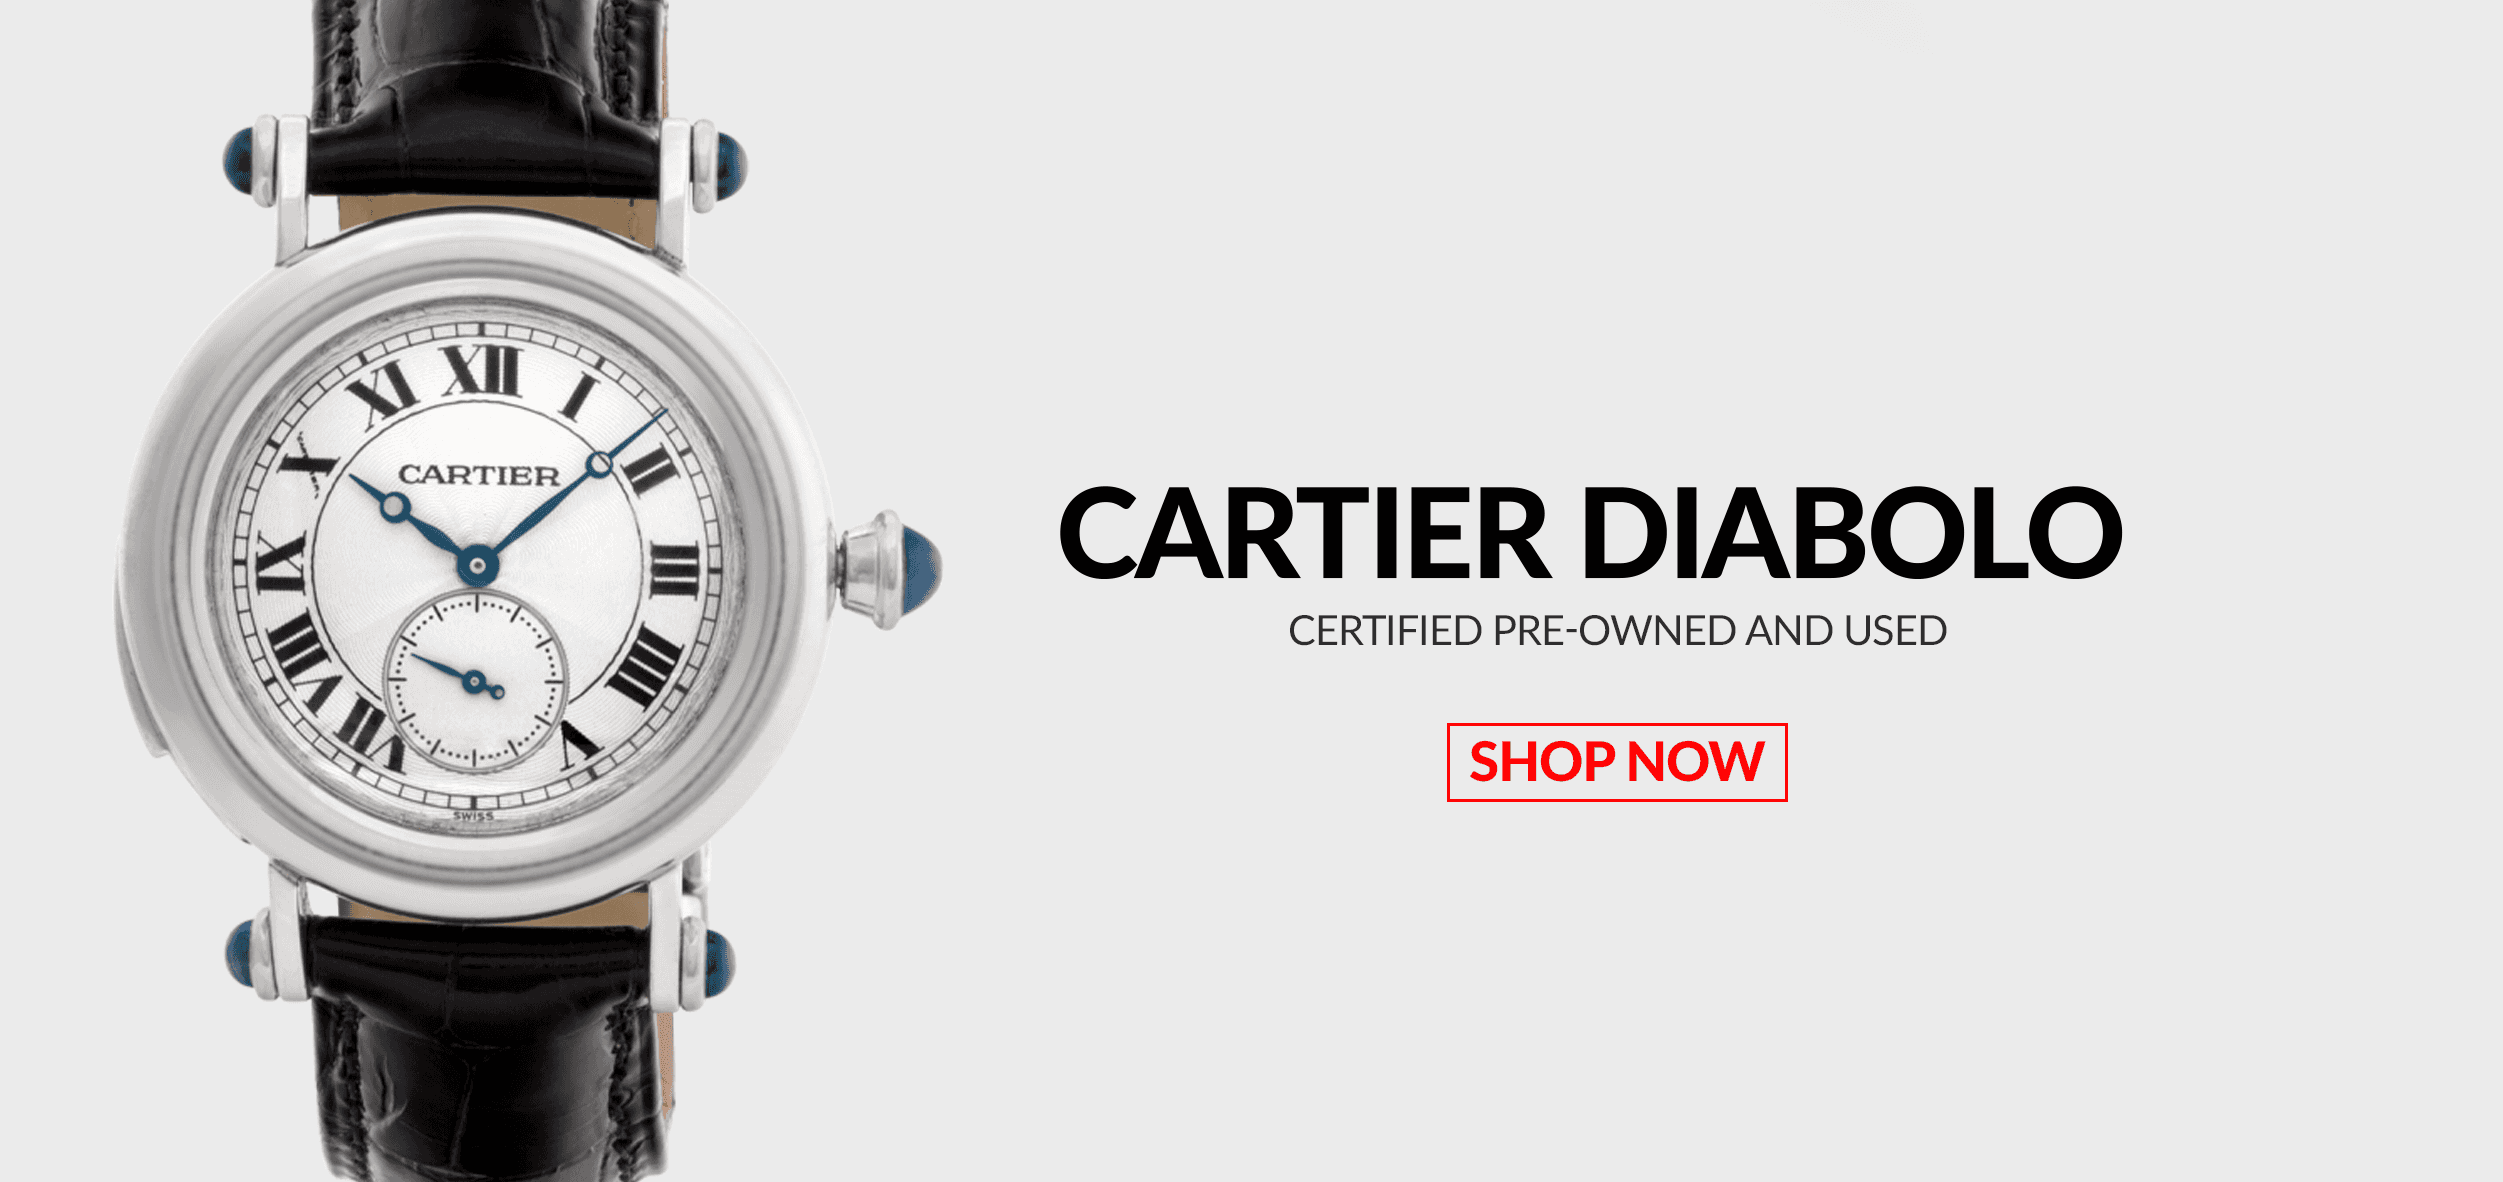 Pre-Owned Certified Used Cartier Diabolo Header